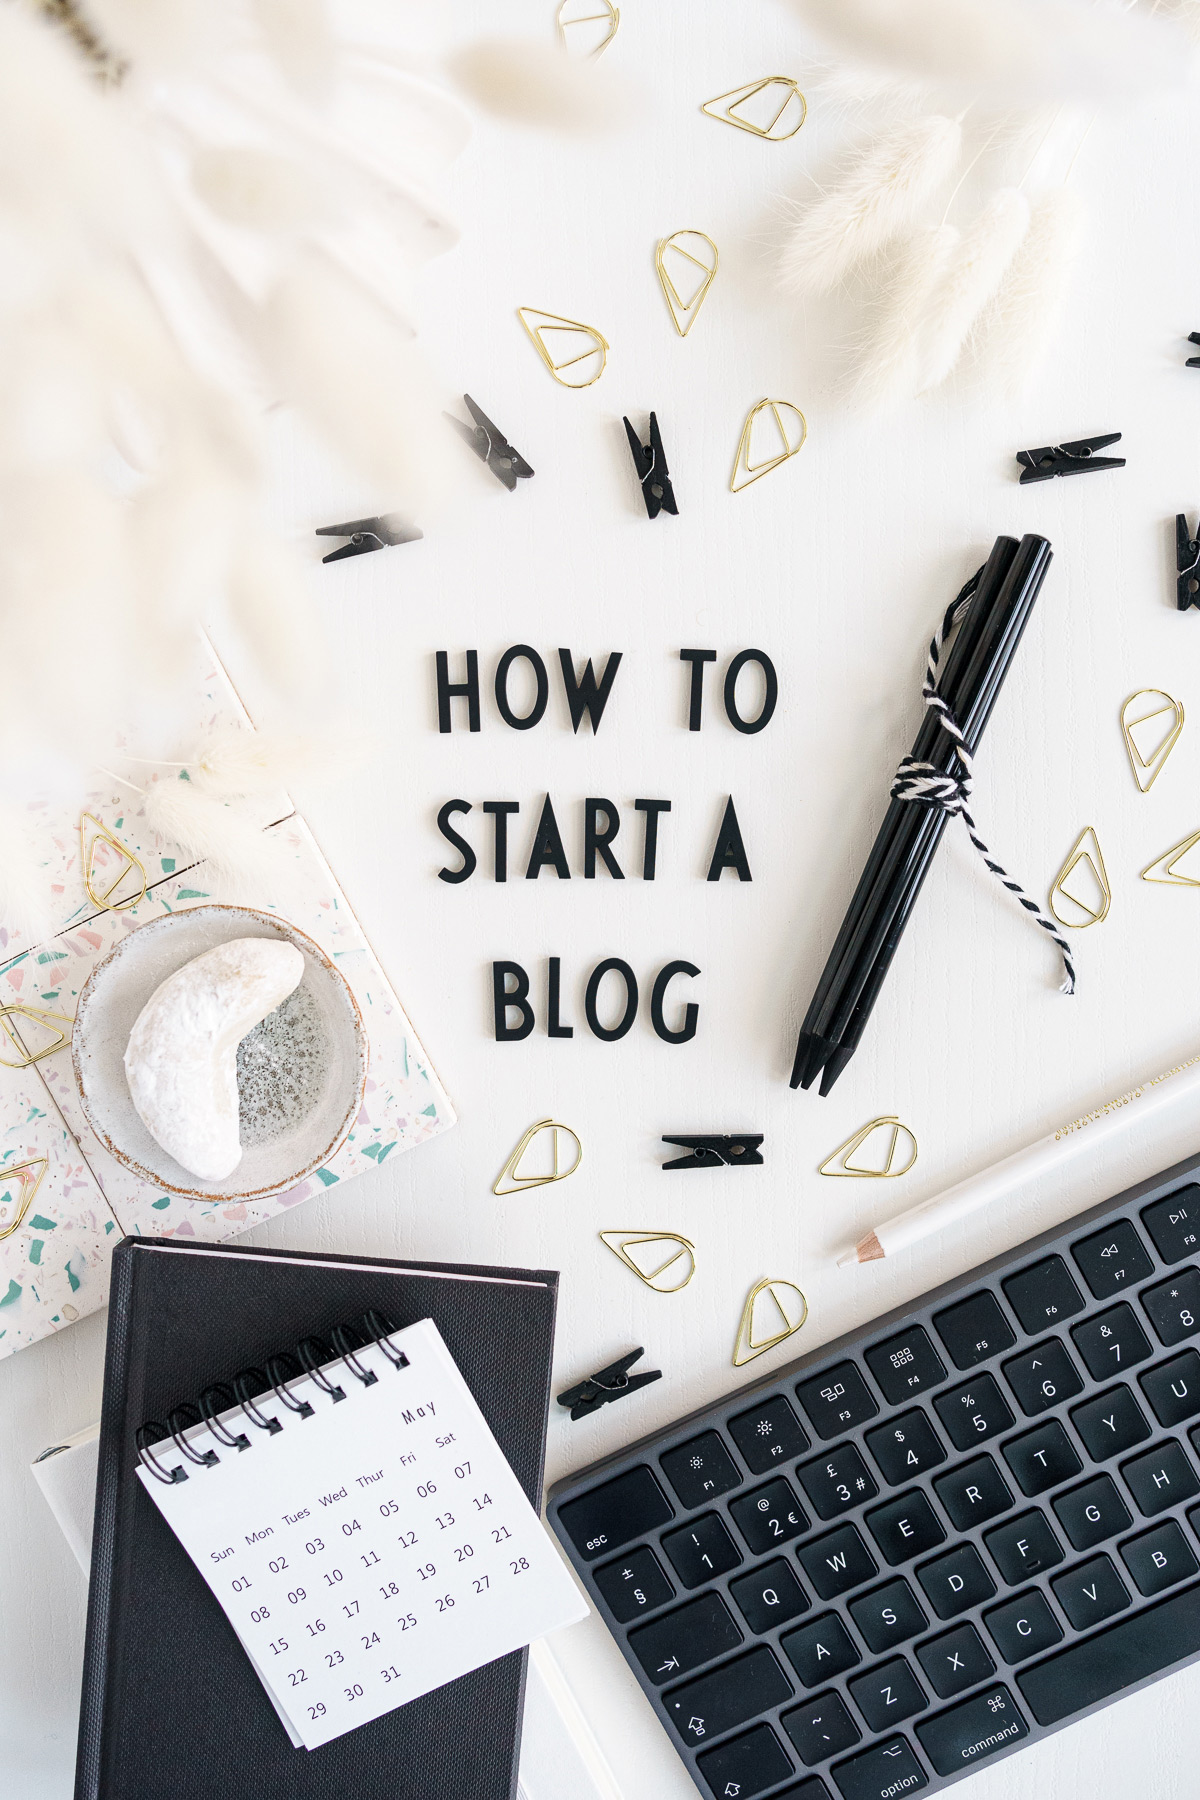 Desk with words saying "How to start a blog"